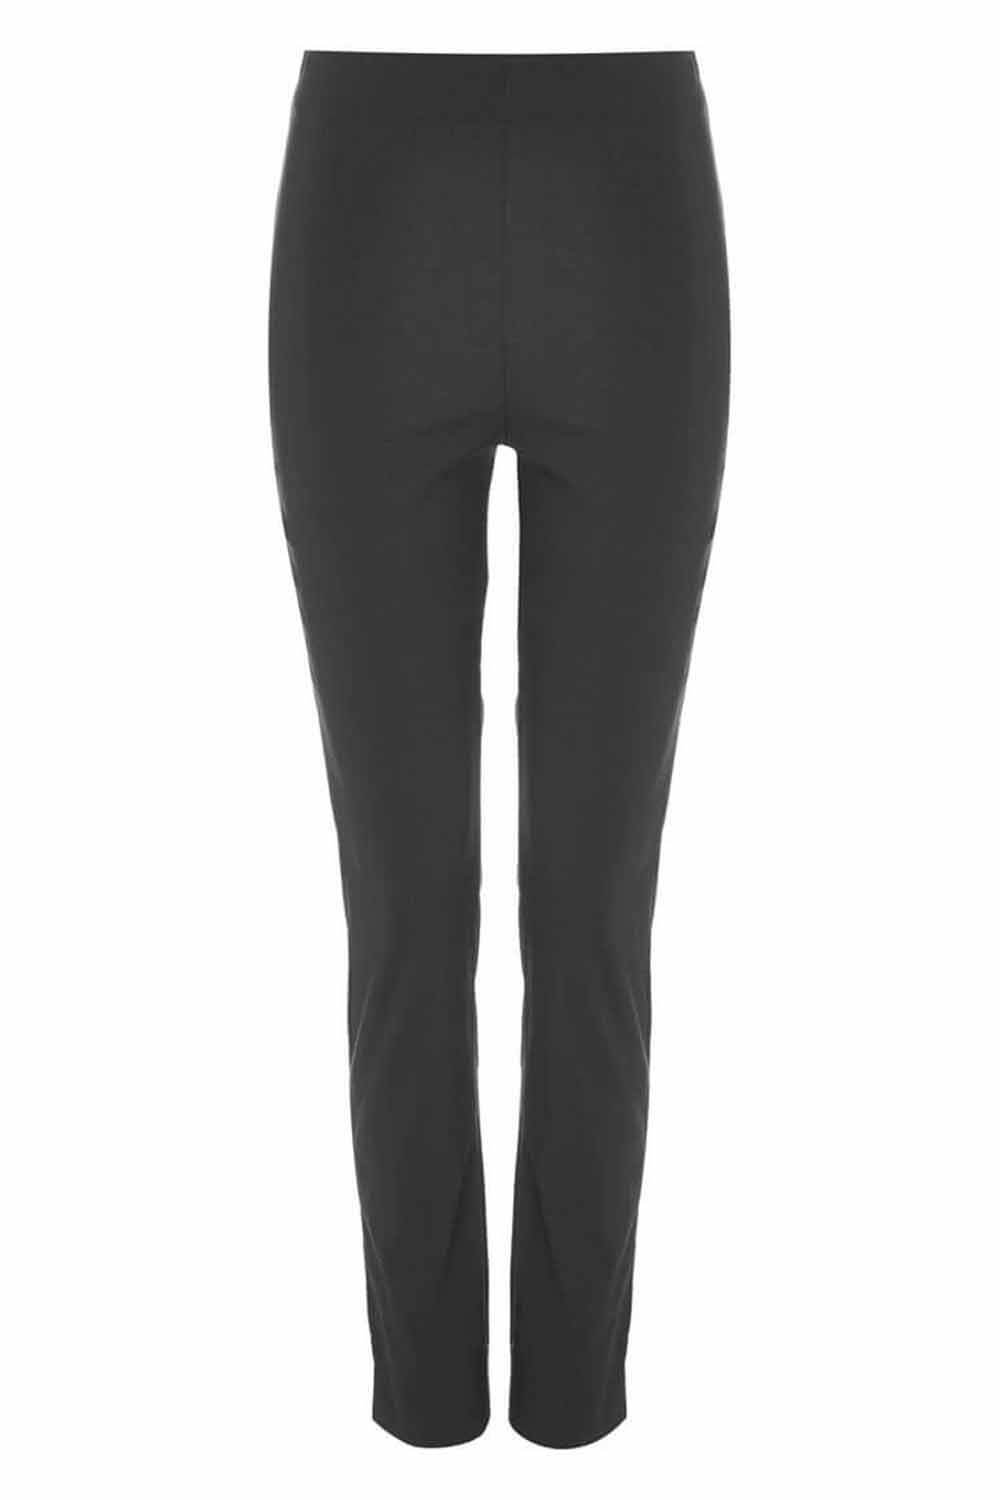 Black Full Length Stretch Trousers, Image 3 of 3